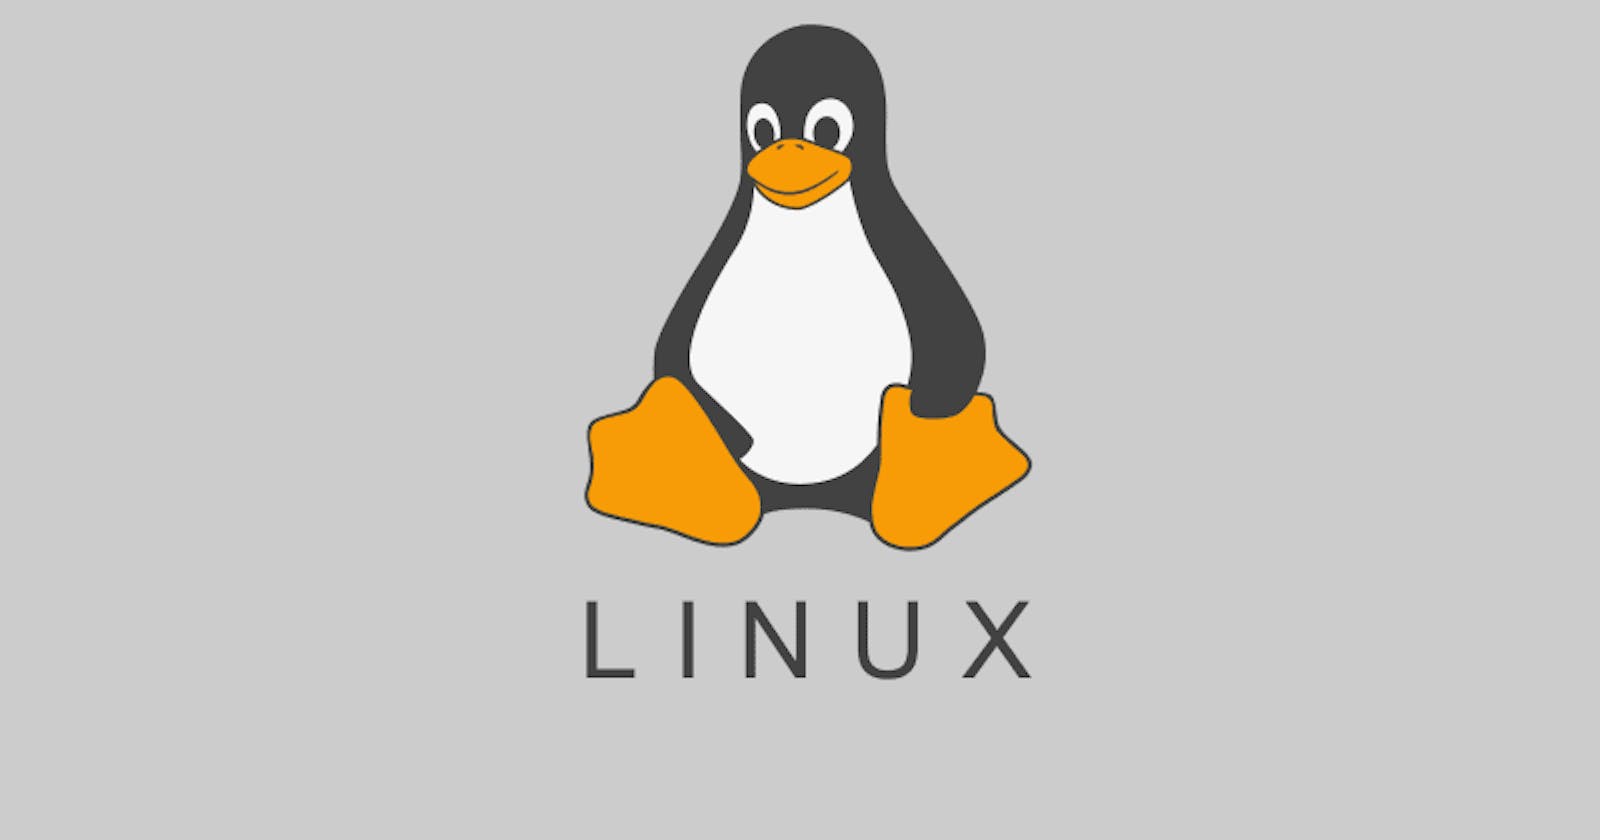 How to Use the Linux Command Line Like a Pro